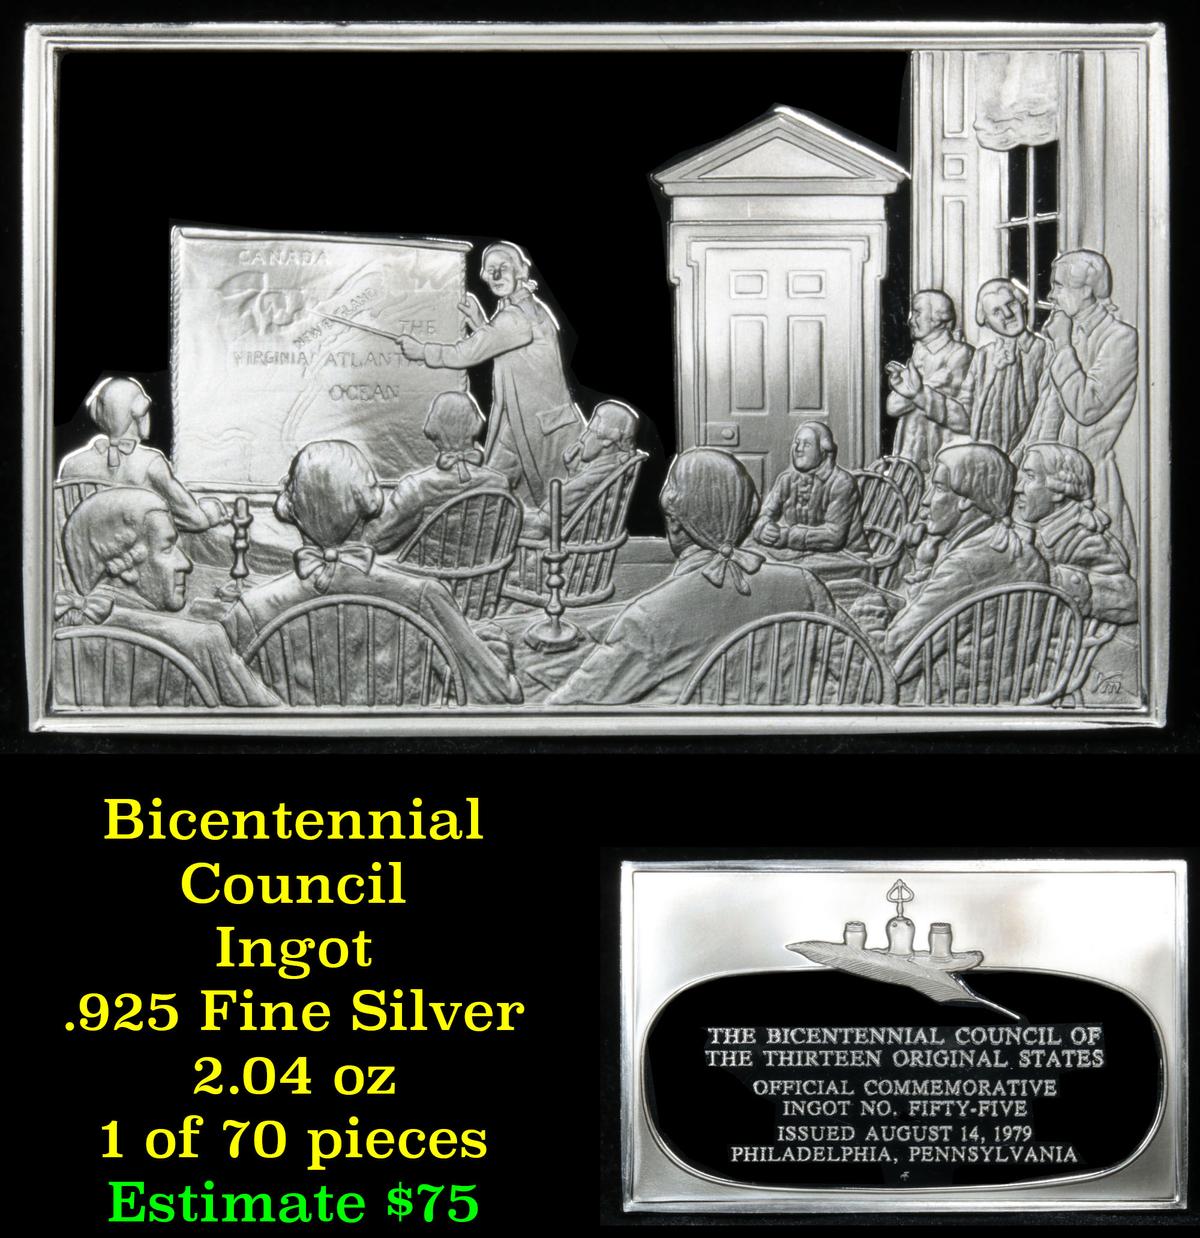 Bicentennial Council of 13 original States Ingot #55, Terms For Peace - 1.84 oz sterling silver